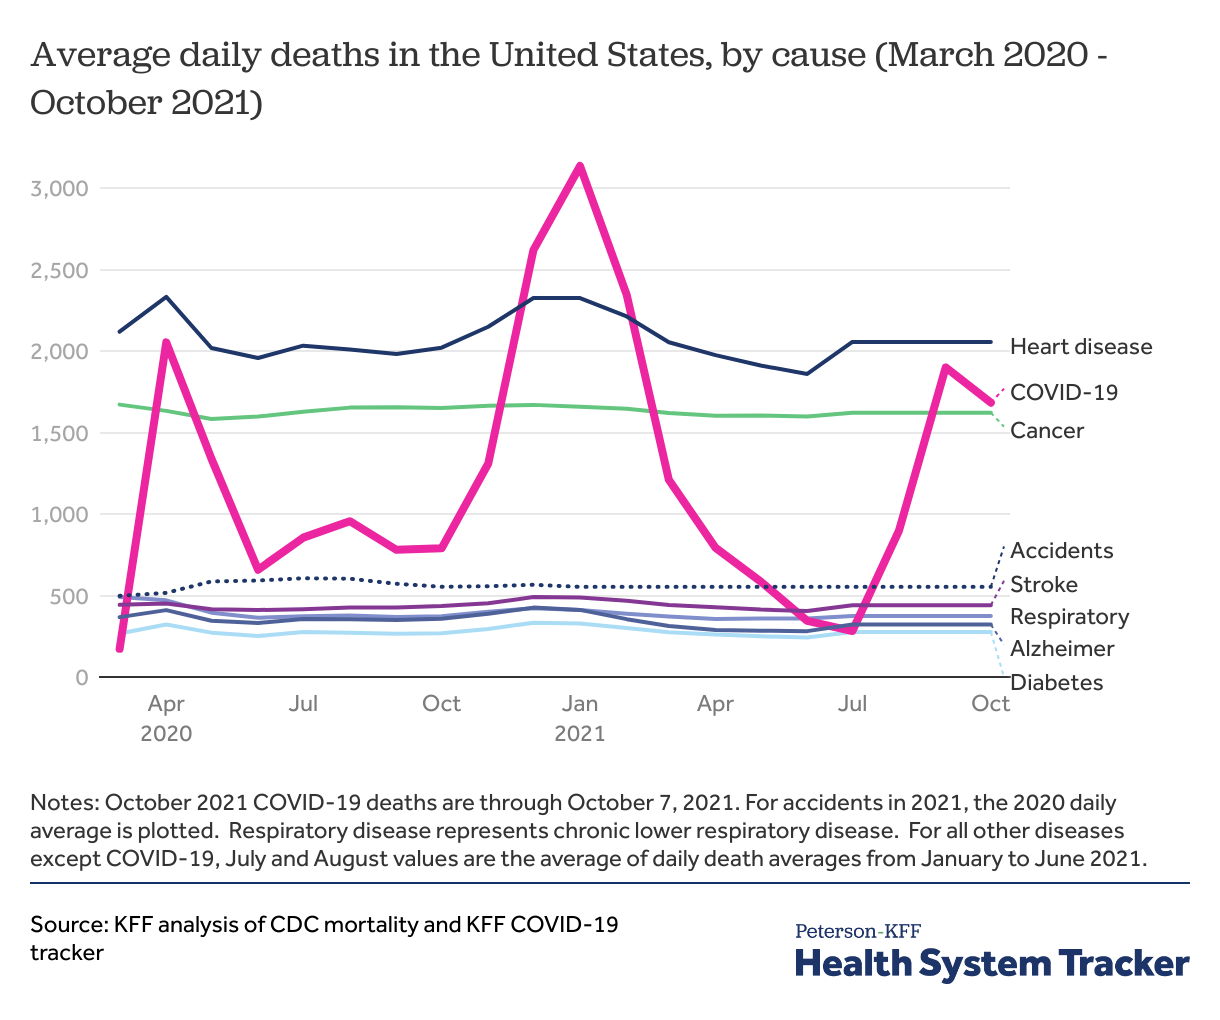 Covid 19 Continues To Be A Leading Cause Of Death In The U S In September 2021 Peterson Kff Health System Tracker